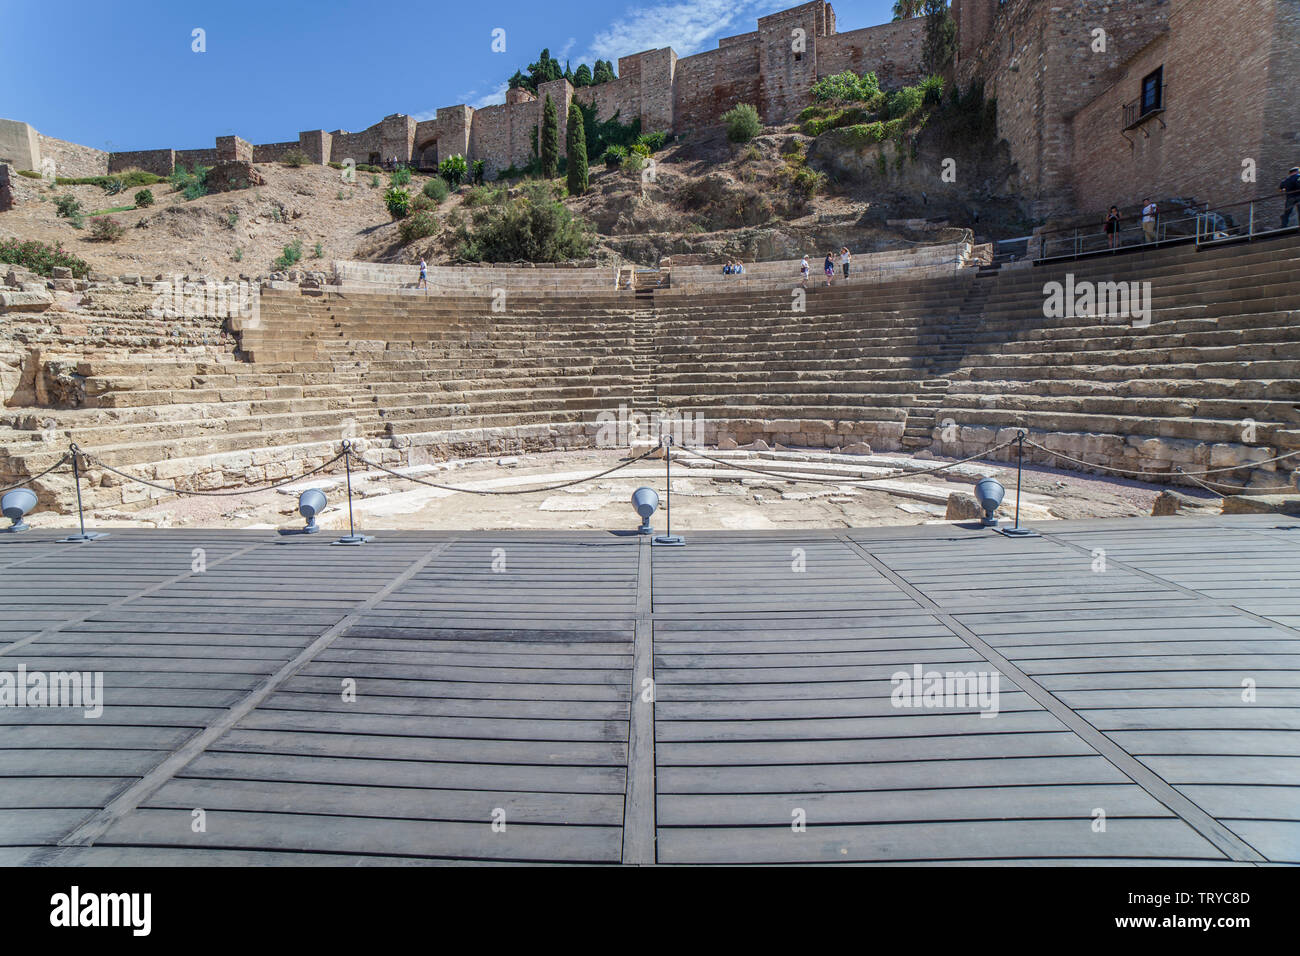 Malaga, Spain - Sept 23th 2019: Stage or pulpitum of Roman Theater of Malaga, Andalusia, Spain Stock Photo